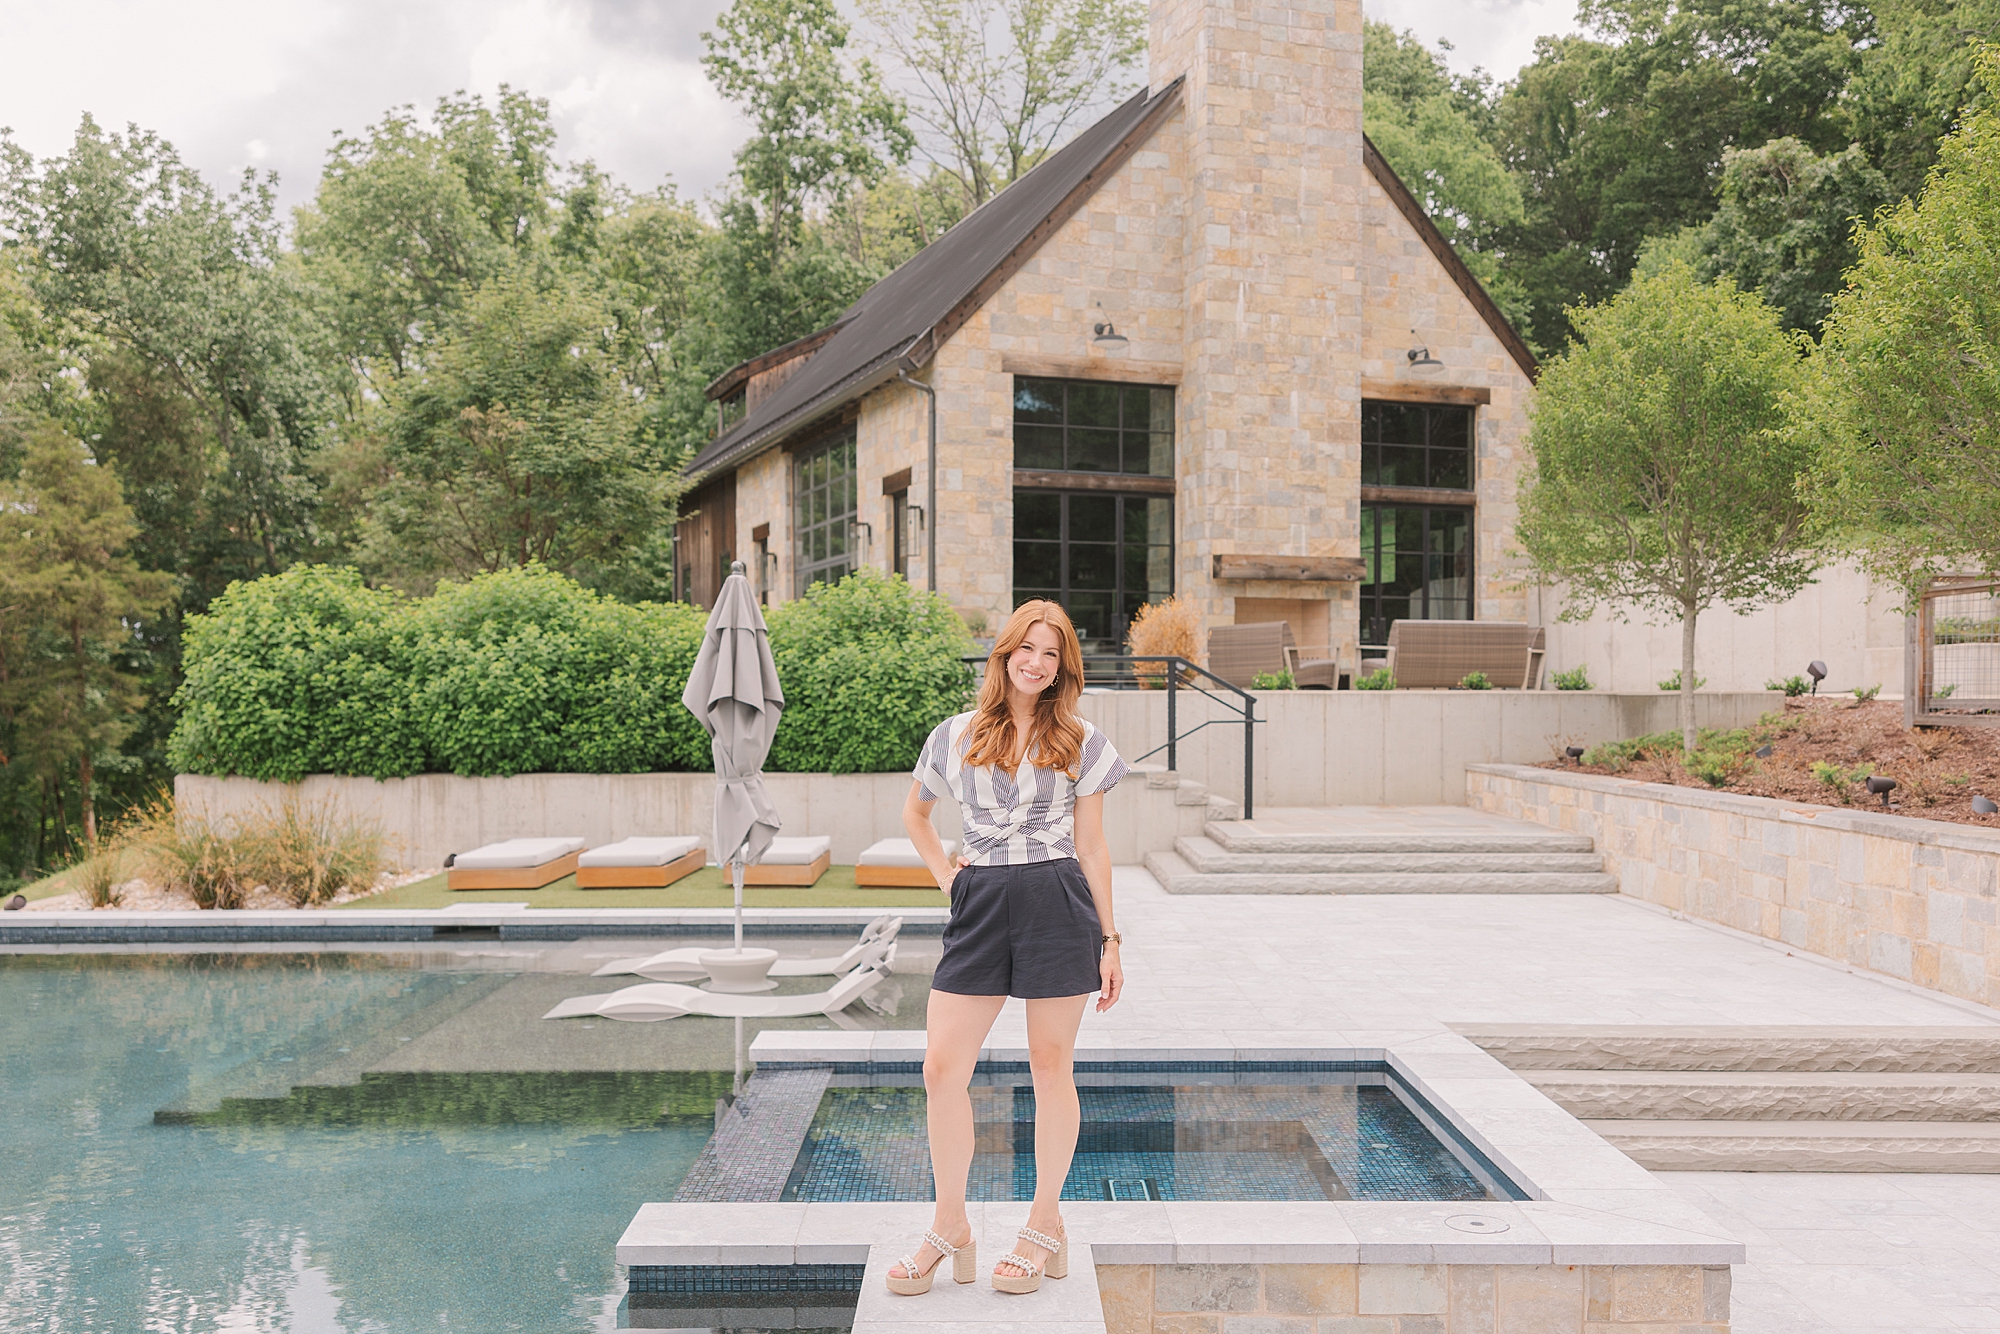 redhead woman stands by pool in striped grey shirt with skirt during branding session